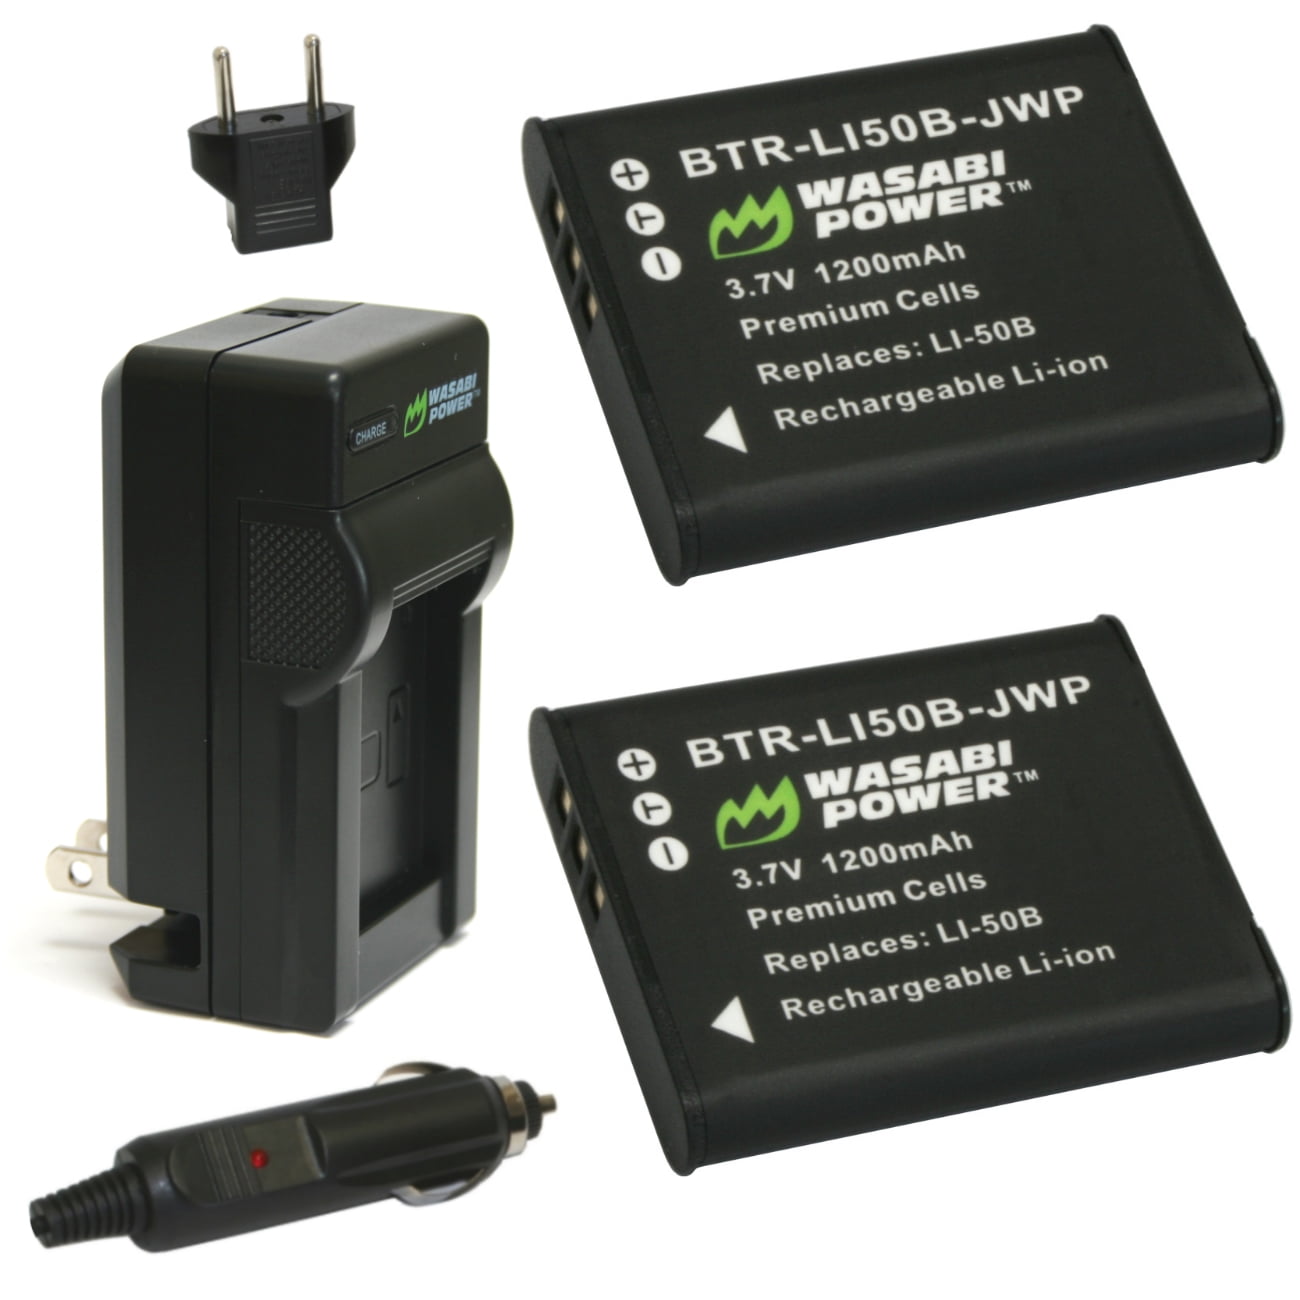 Li-50B Car Home Wall Charger Set For Olympus mju Touch 6020 8010 9000 XZ-1 XZ-10 